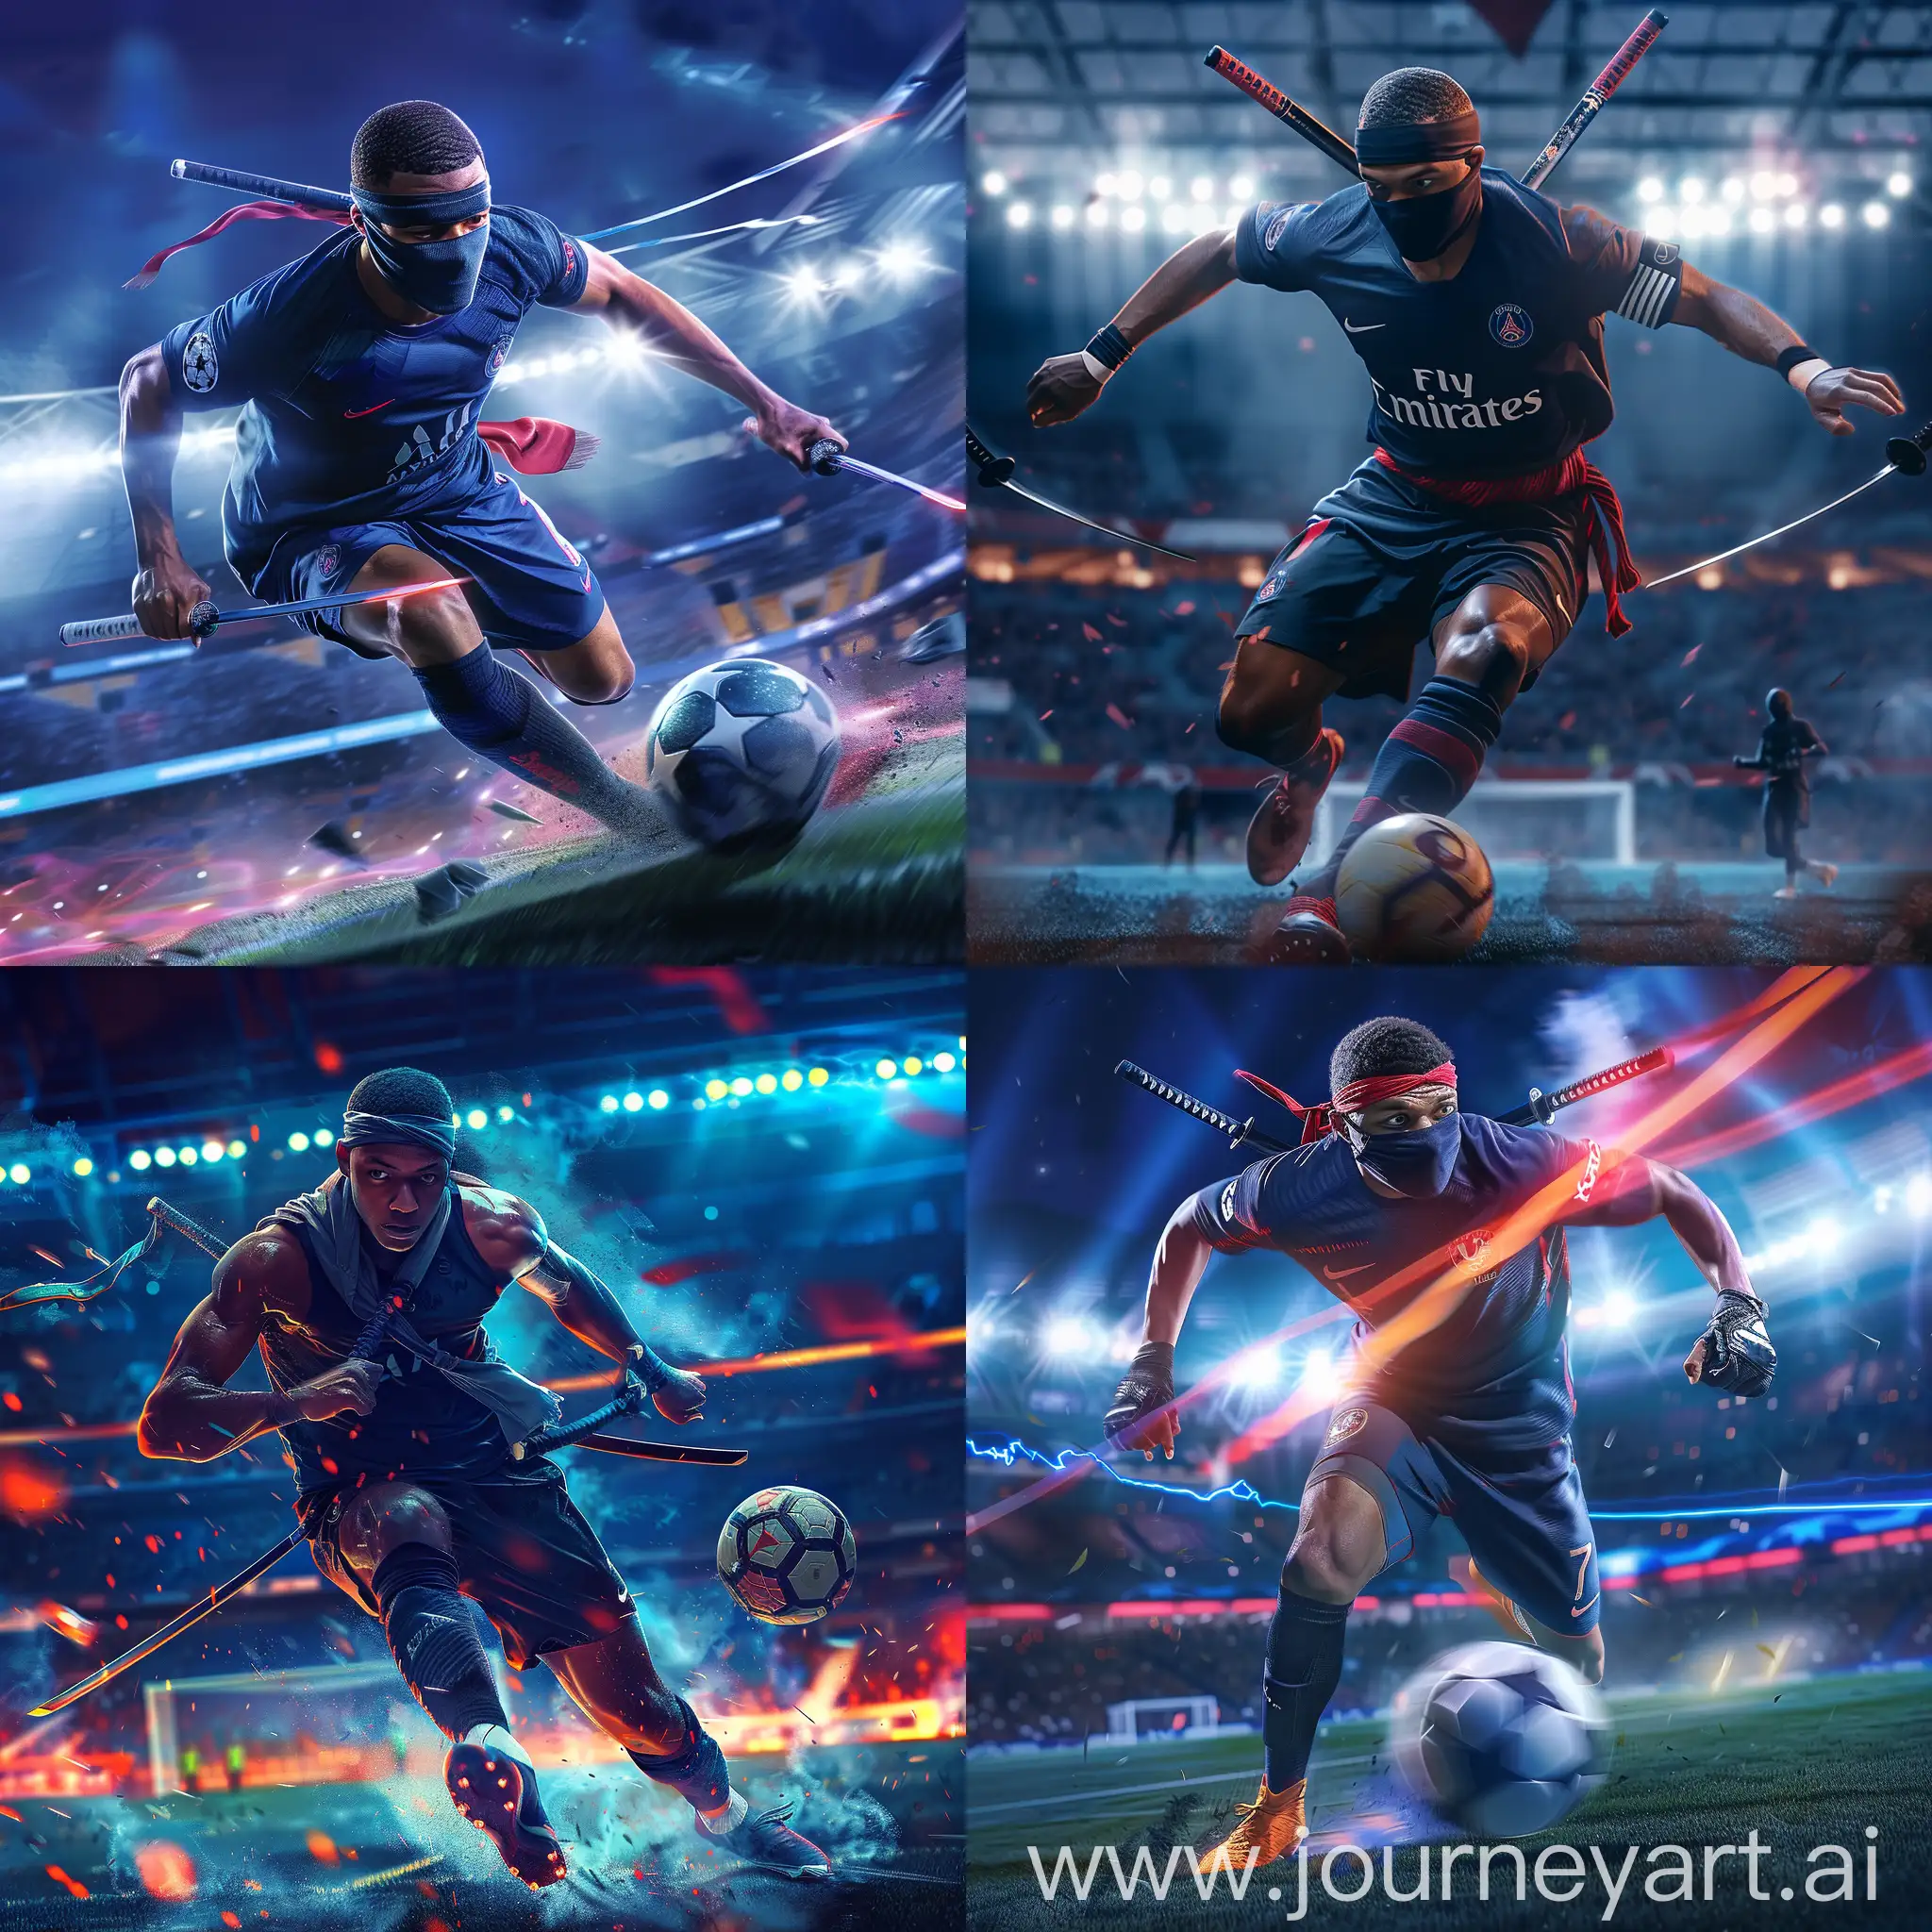 "Kylian Mbappé, wearing a short ninja mask, is seen running and dribbling a soccer ball. He has two katanas strapped to his back, adding a unique and dynamic element to his athletic form. The background showcases a soccer field with stadium lights illuminating the scene, highlighting his intense focus and speed. The overall atmosphere is energetic and action-packed, with a blend of athleticism and ninja elements."